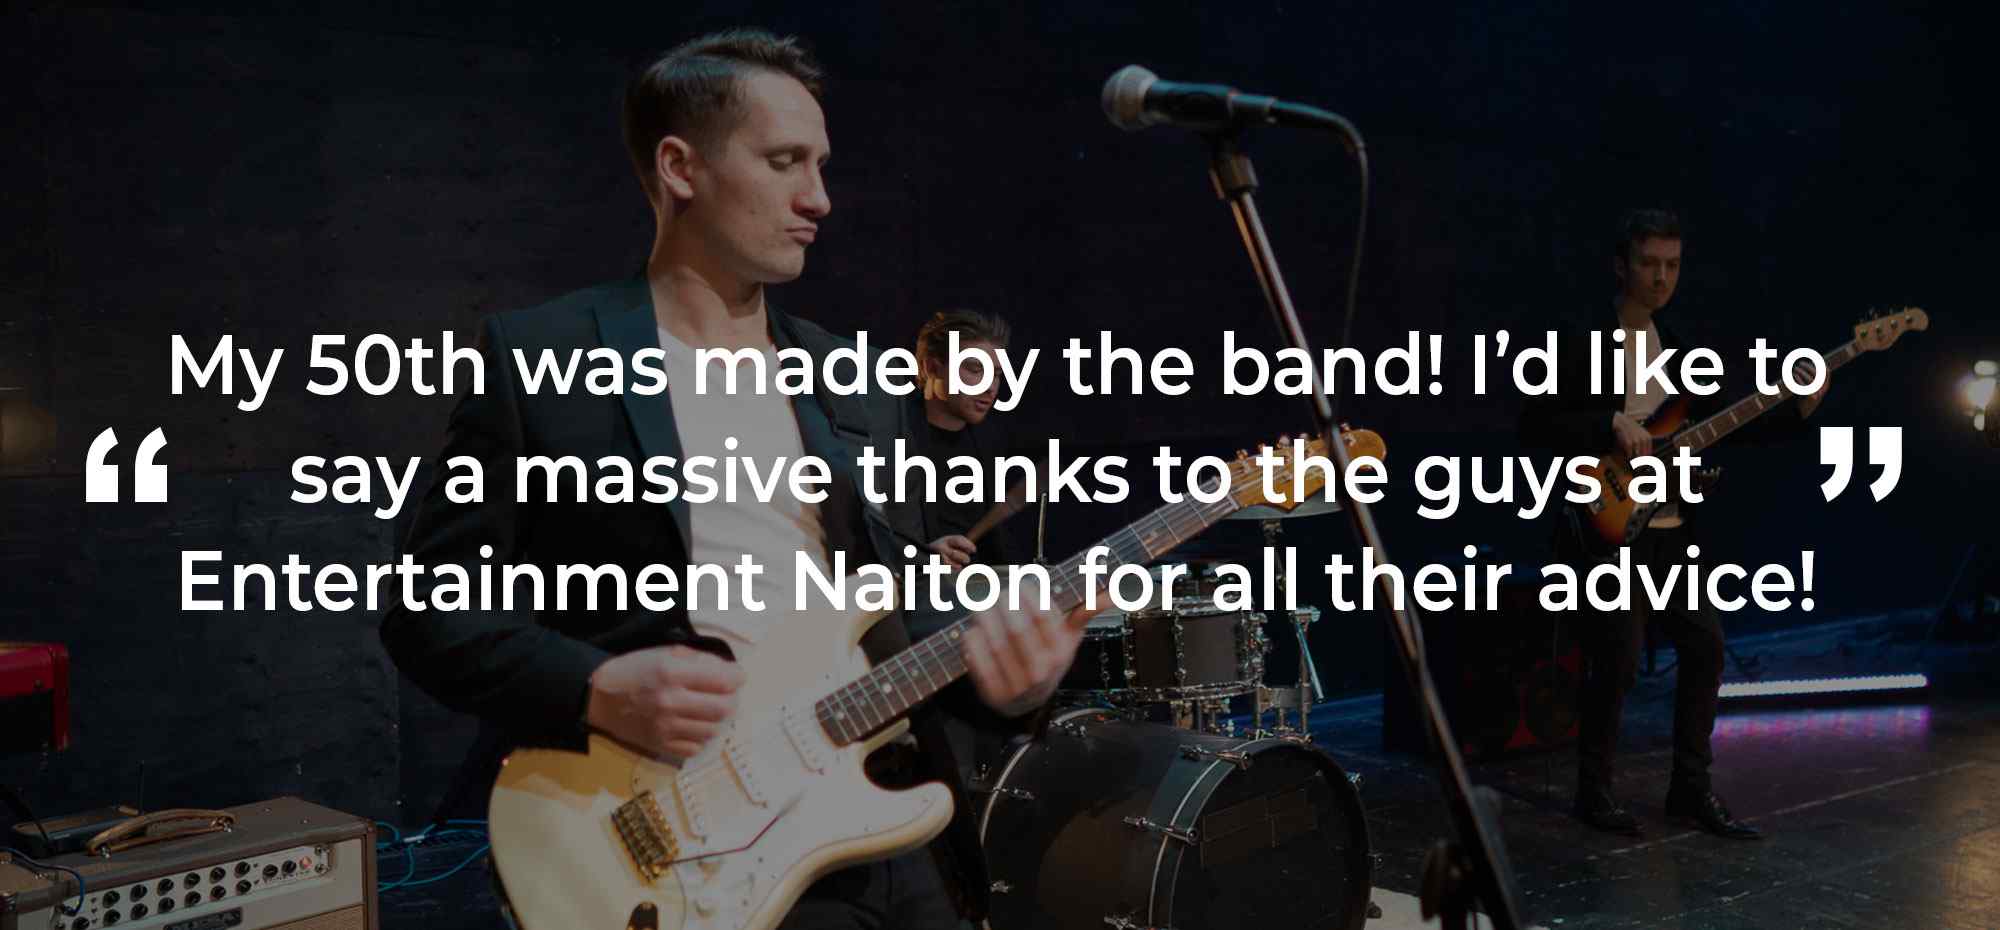 Client Review of a Party Band Central Scotland